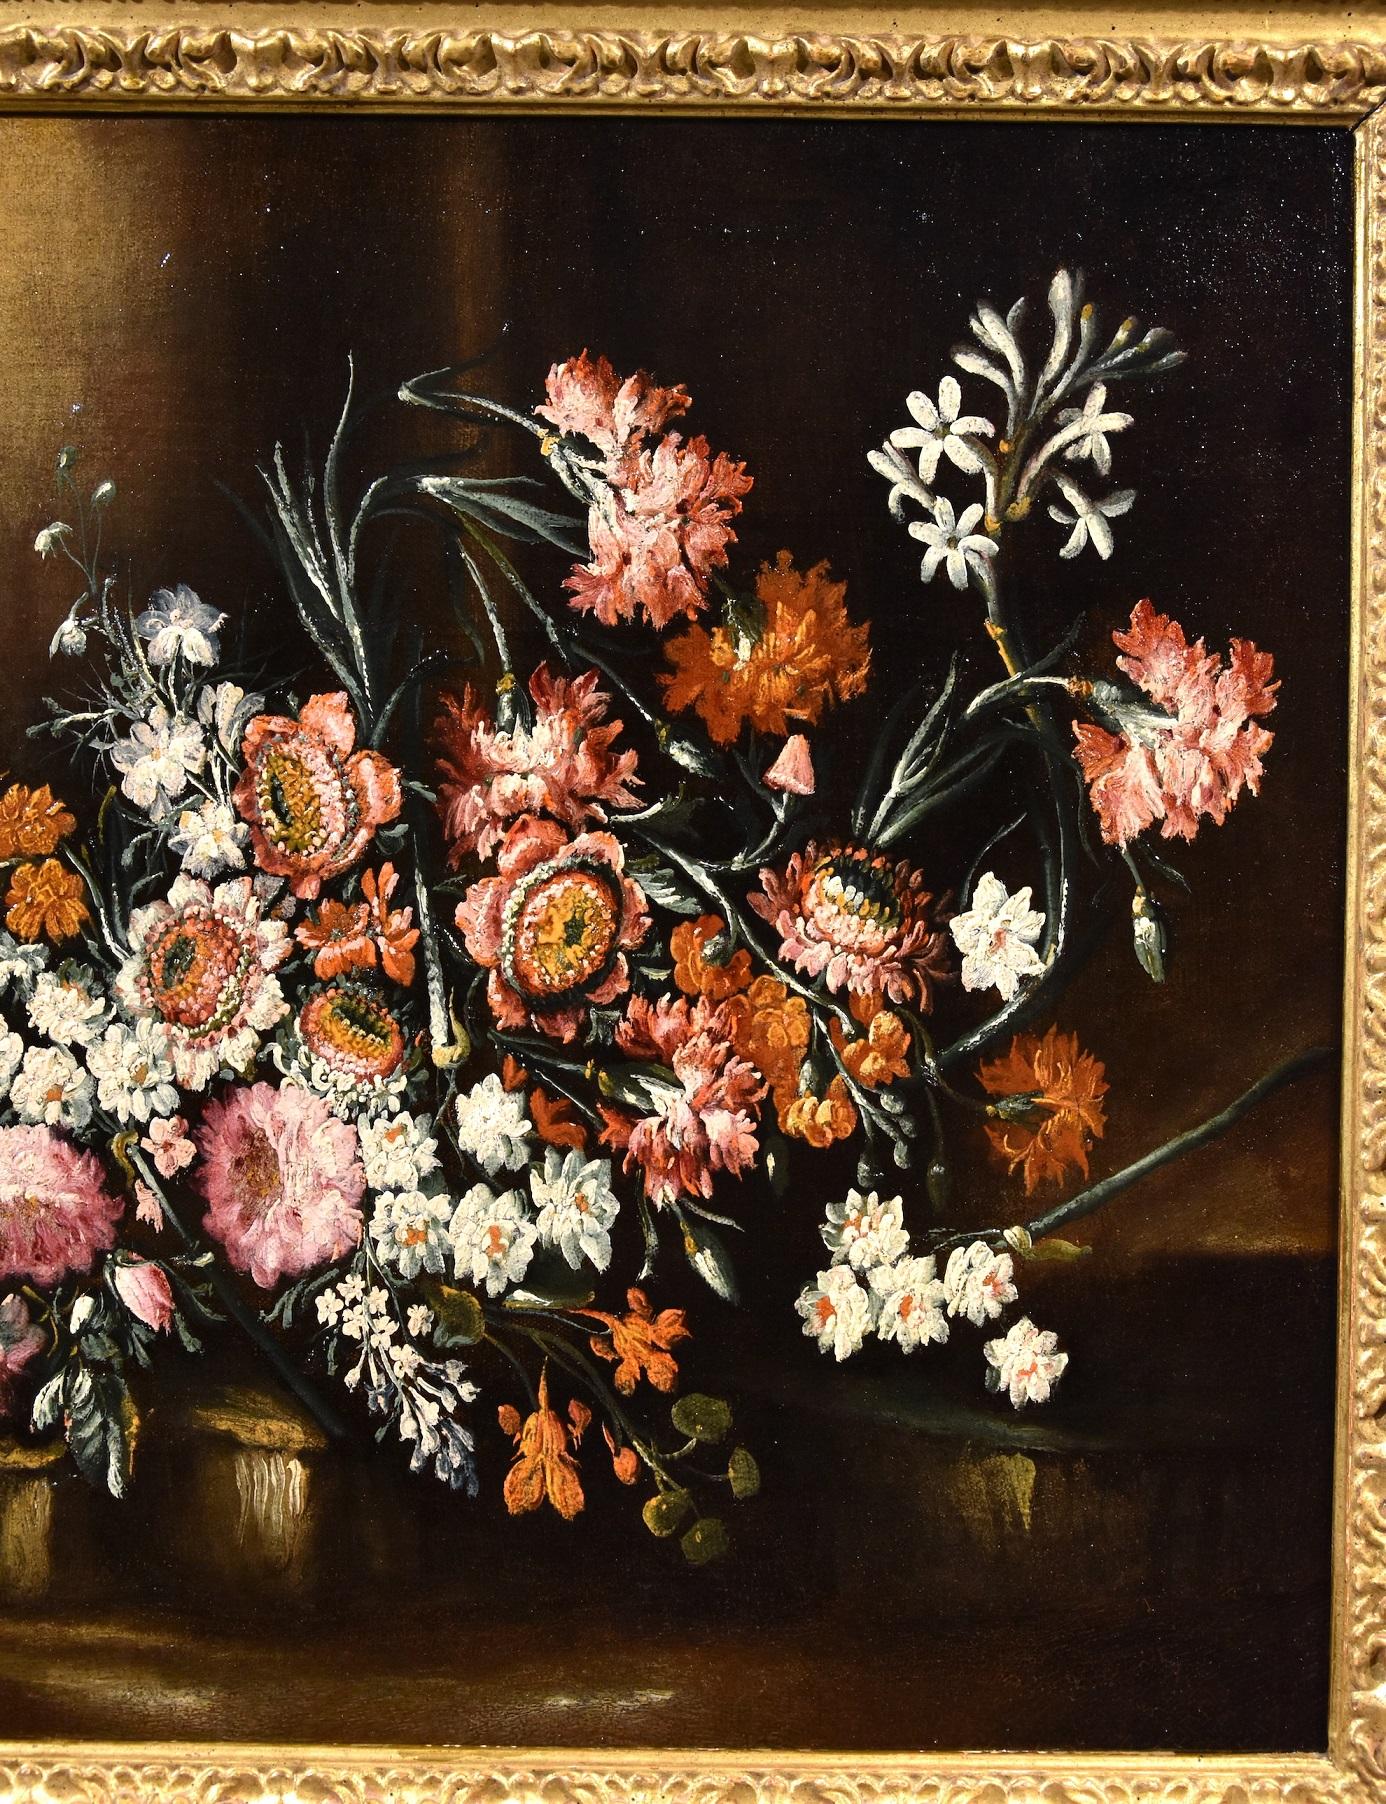 Still Life Flowers 18th Century Italian Caffi Paint Oil on canvas Old master Art - Brown Still-Life Painting by Margherita Caffi (Cremona 1647 - Milan 1710)